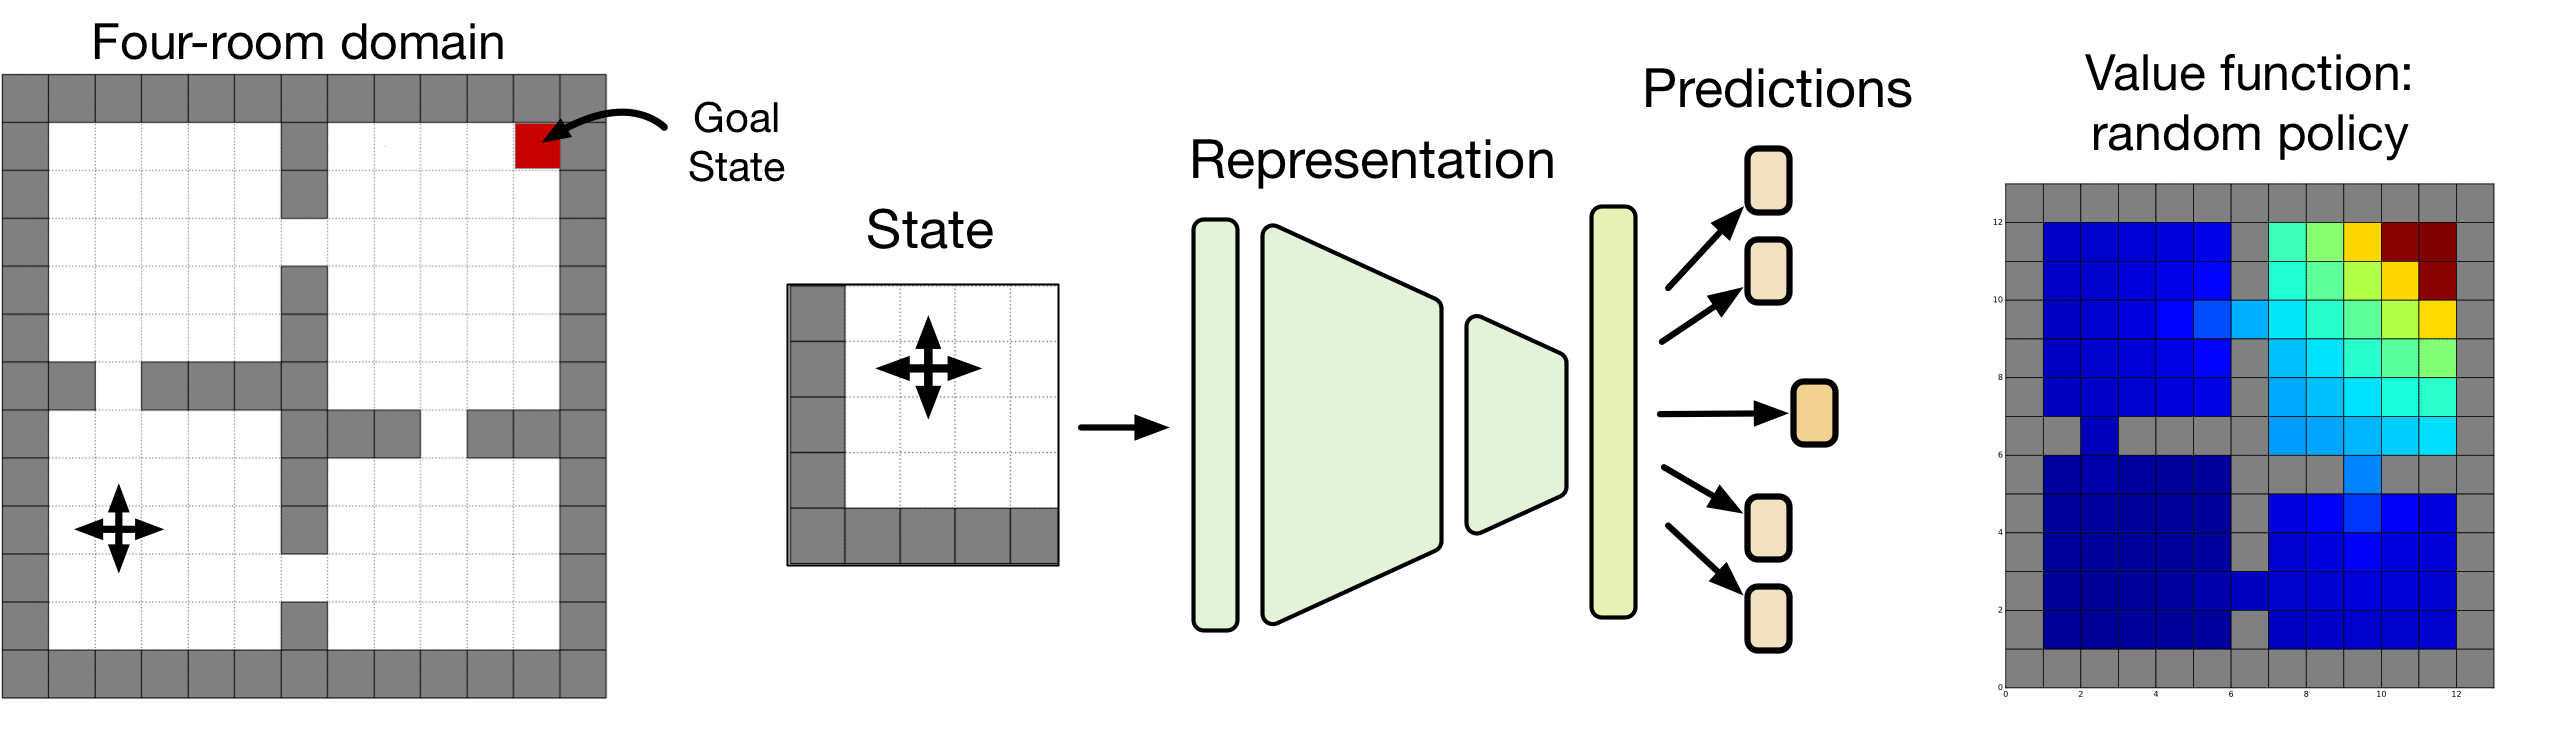 Elements of the "apple pie" representation learning experiment.